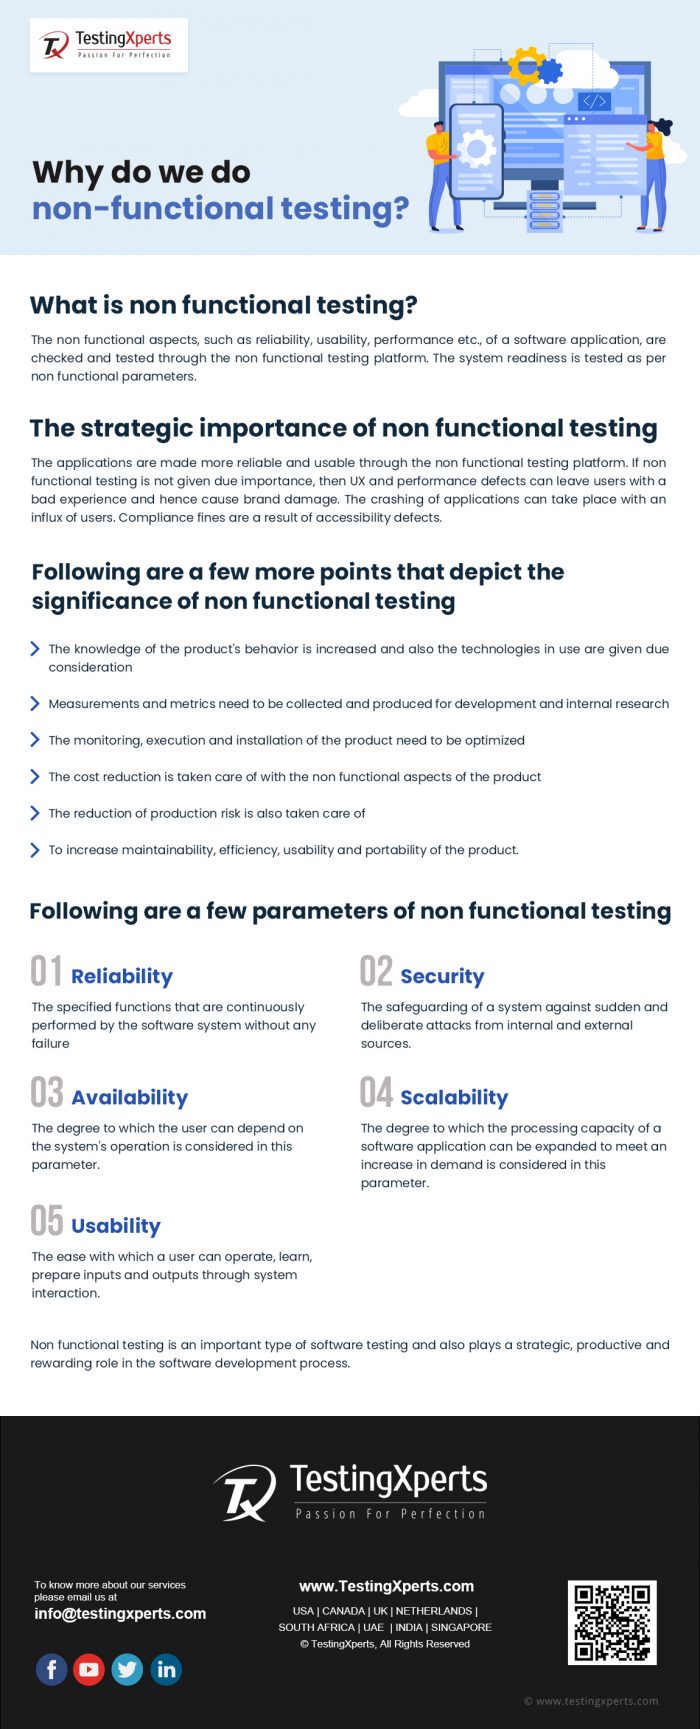 Why do we do non-functional testing?